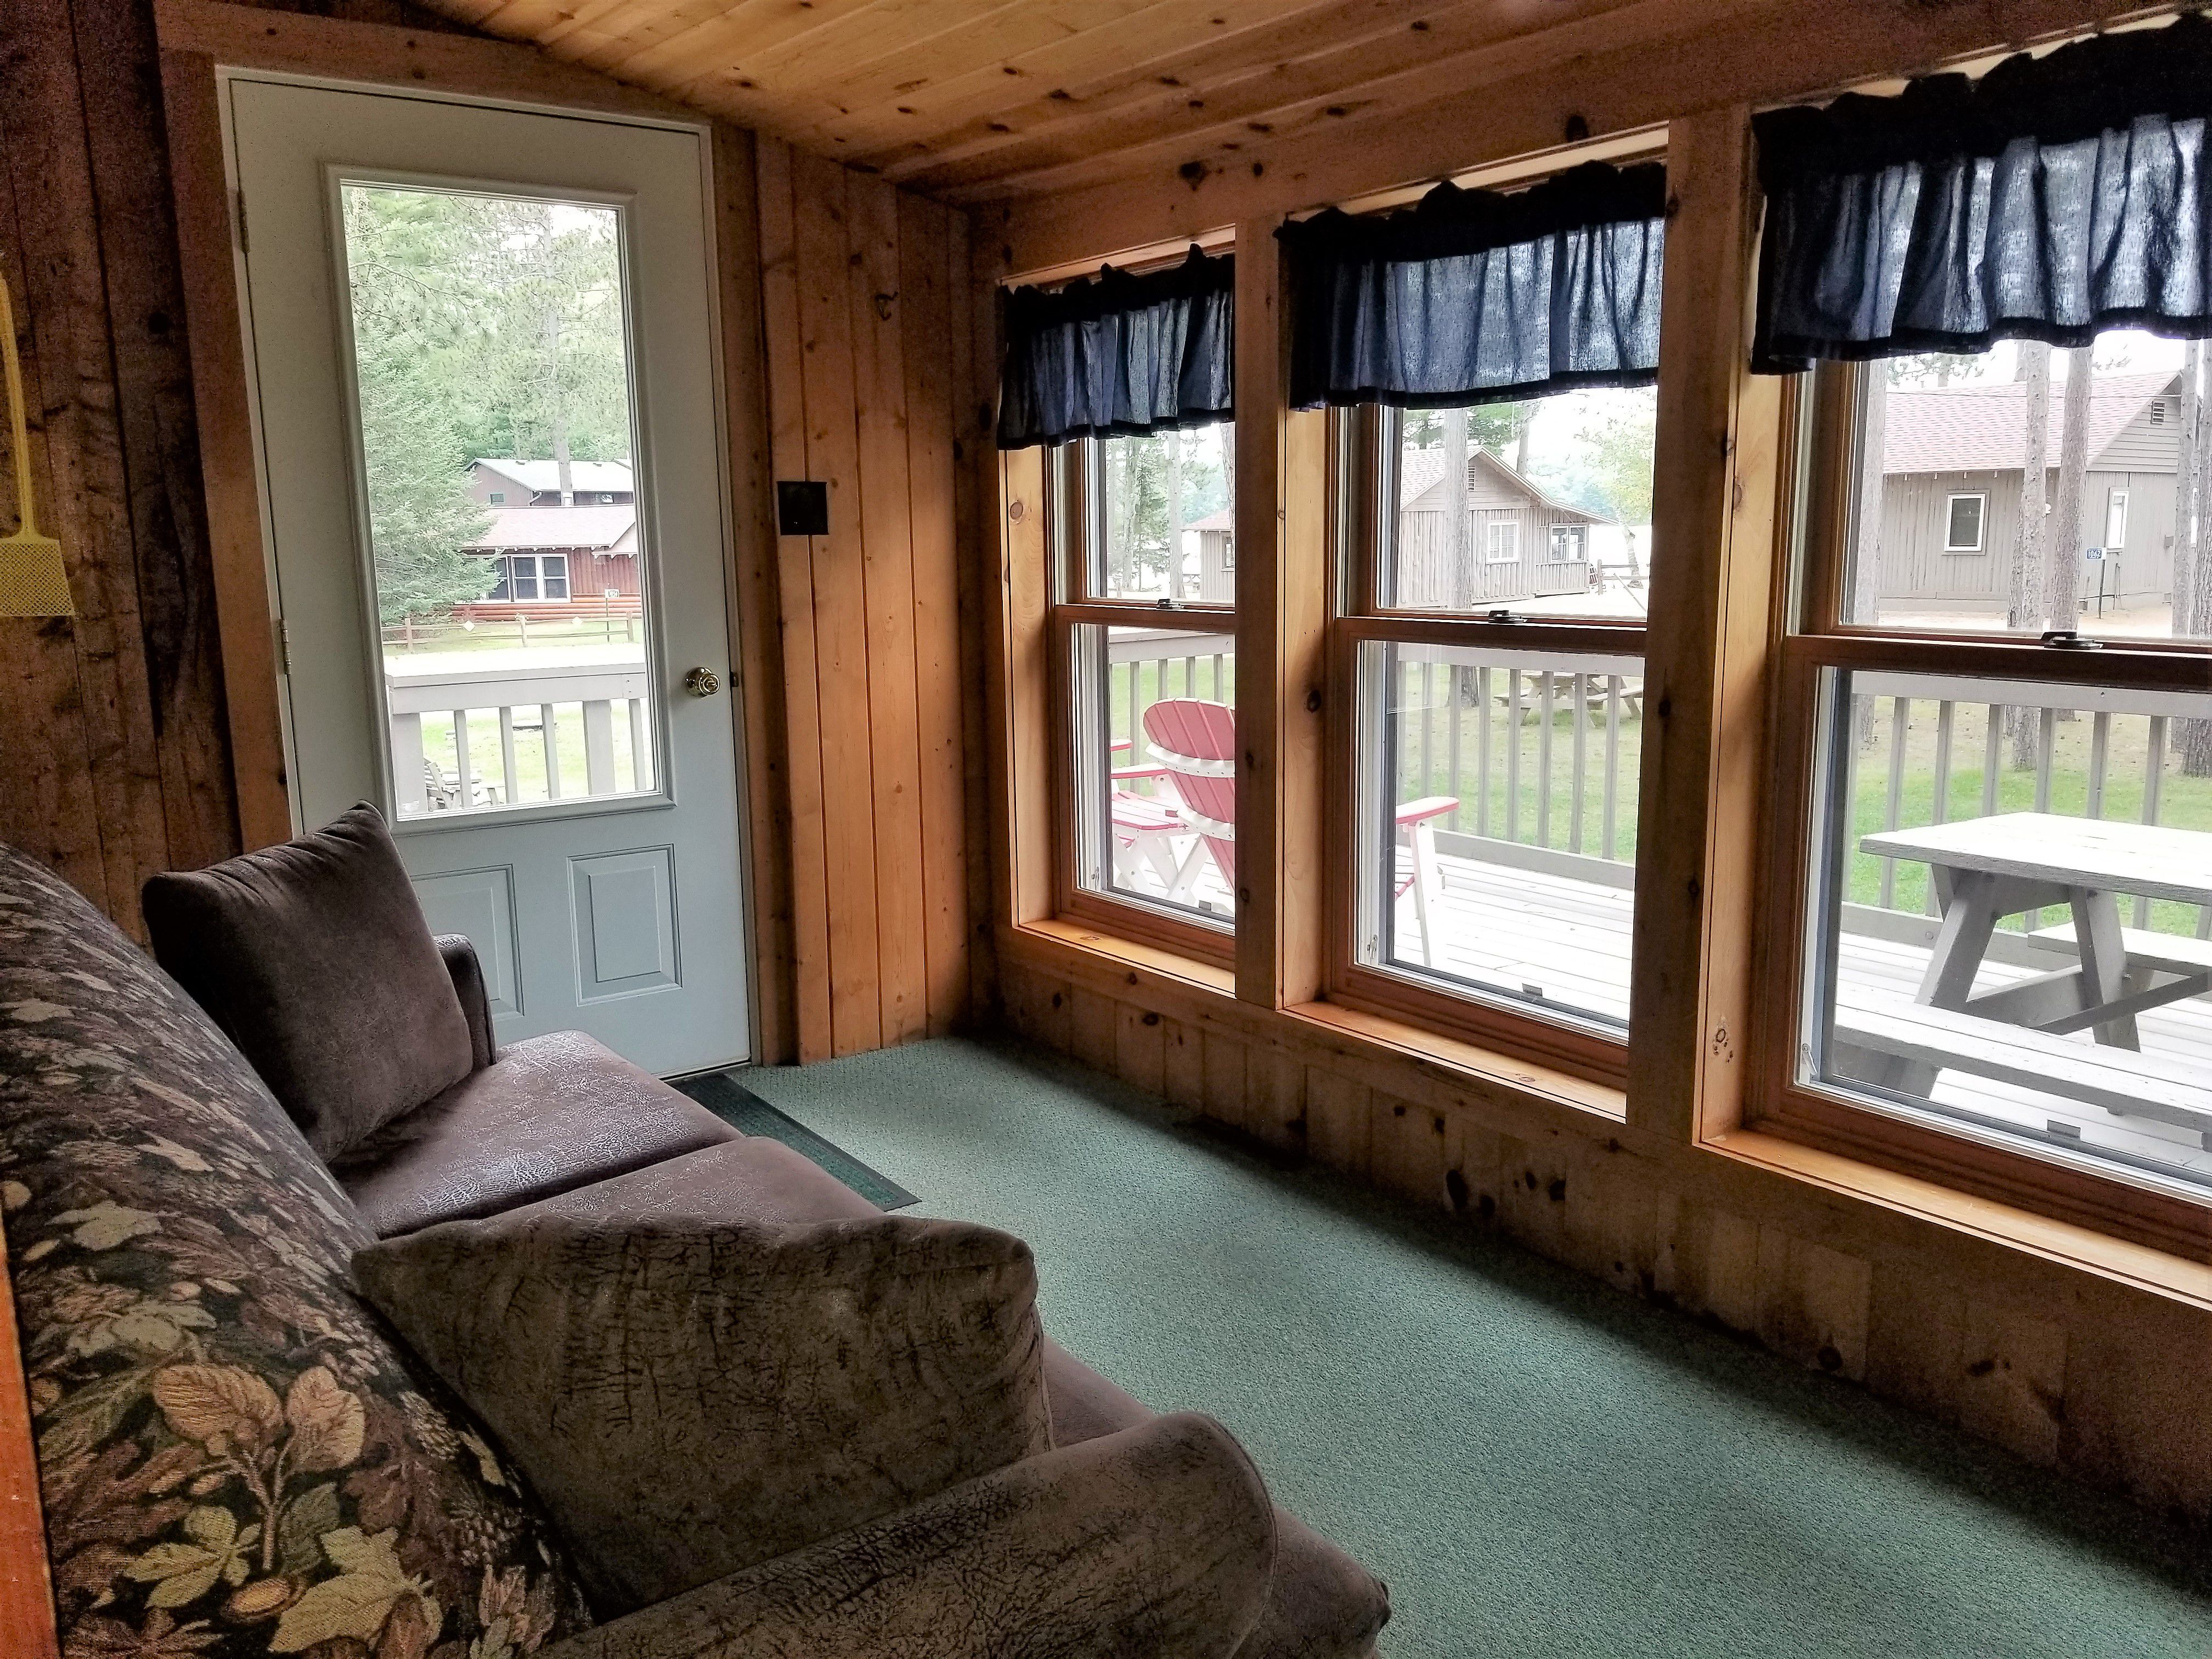 A comfortable porch with nice views of the area